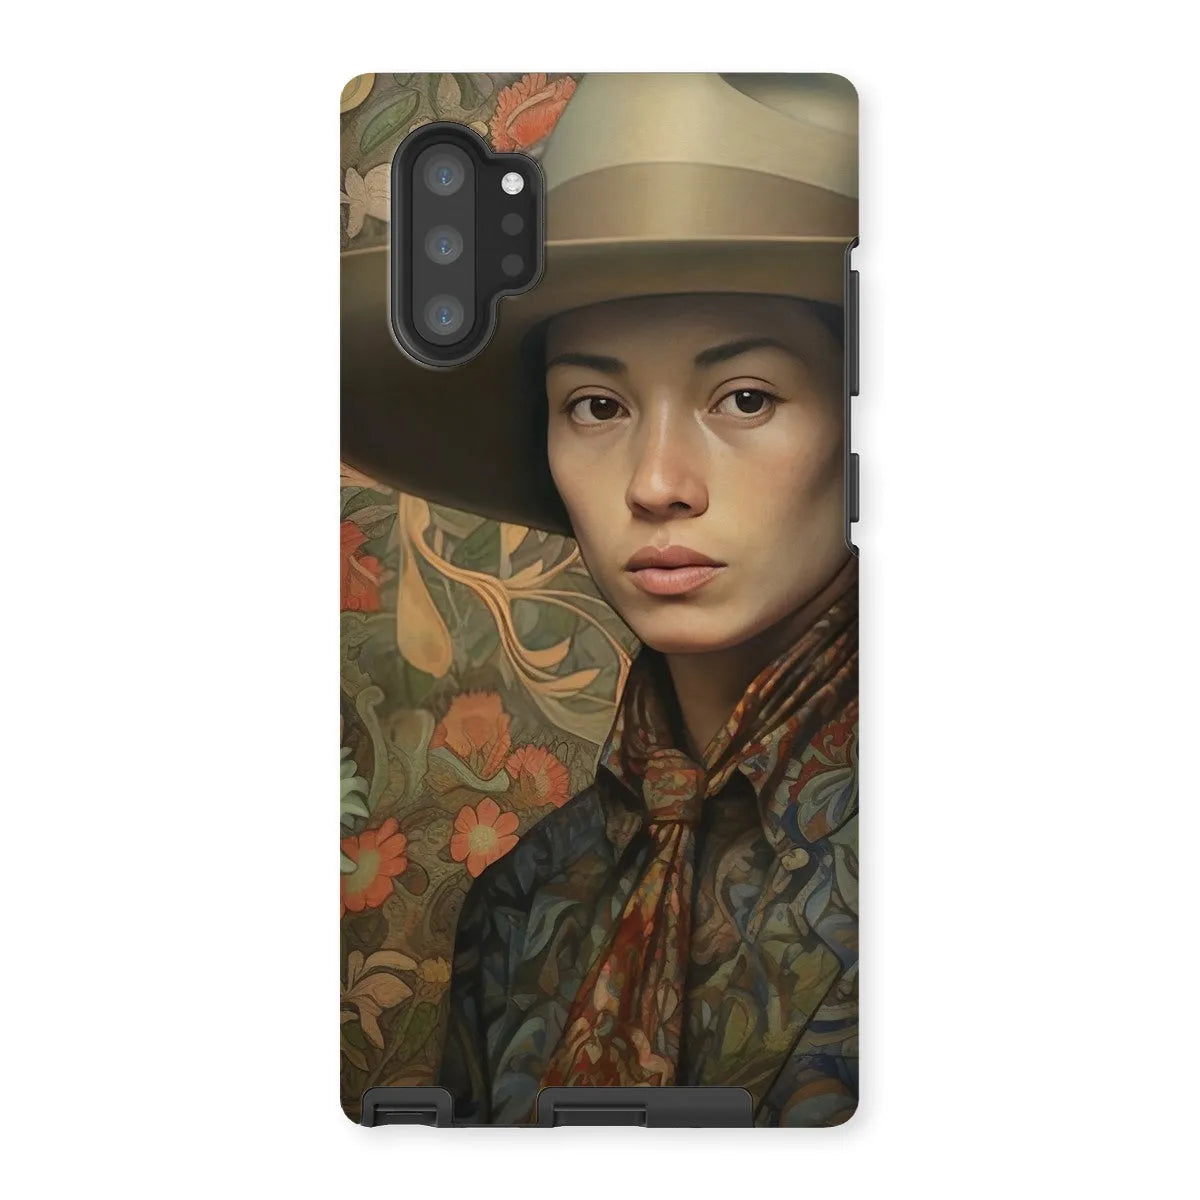 Fulin The Gay Cowboy - Dandy Gay Men Art Phone Case - Samsung Galaxy Note 10p / Matte - Mobile Phone Cases - Aesthetic